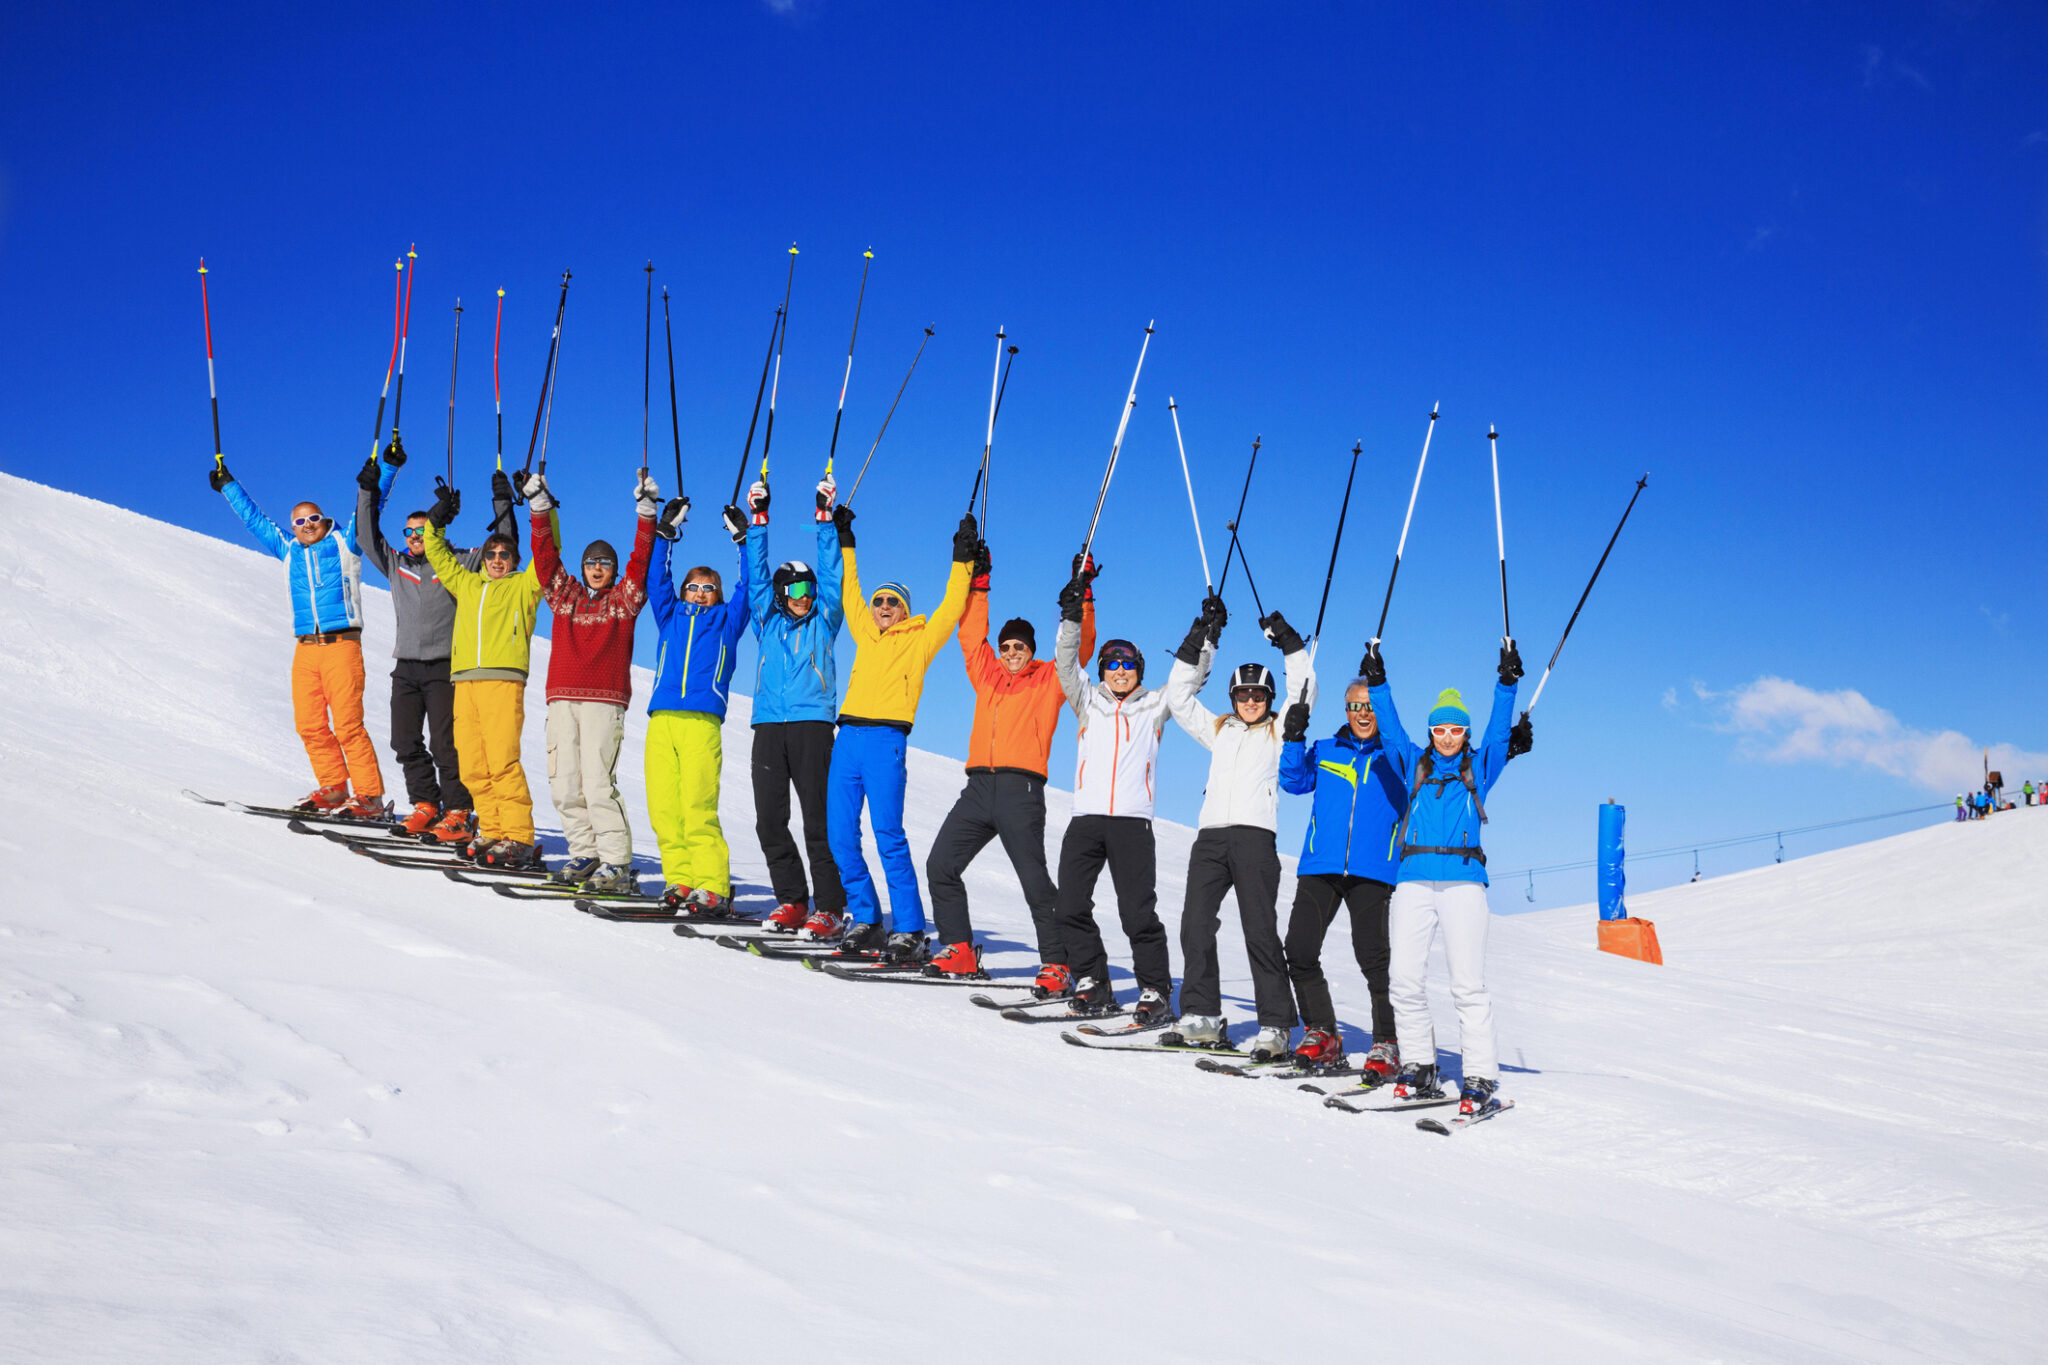 A large happy group of snow skiers. Ski club school skiing trips. Friends - Colorful male and female groups, enjoying on sunny ski resorts.  The snow in the foreground, beautiful blue sky in the background, applicable for all ski resorts and locations.  Shot with Canon 5DMarkIII, developed from RAW, Adobe RGB color profile.